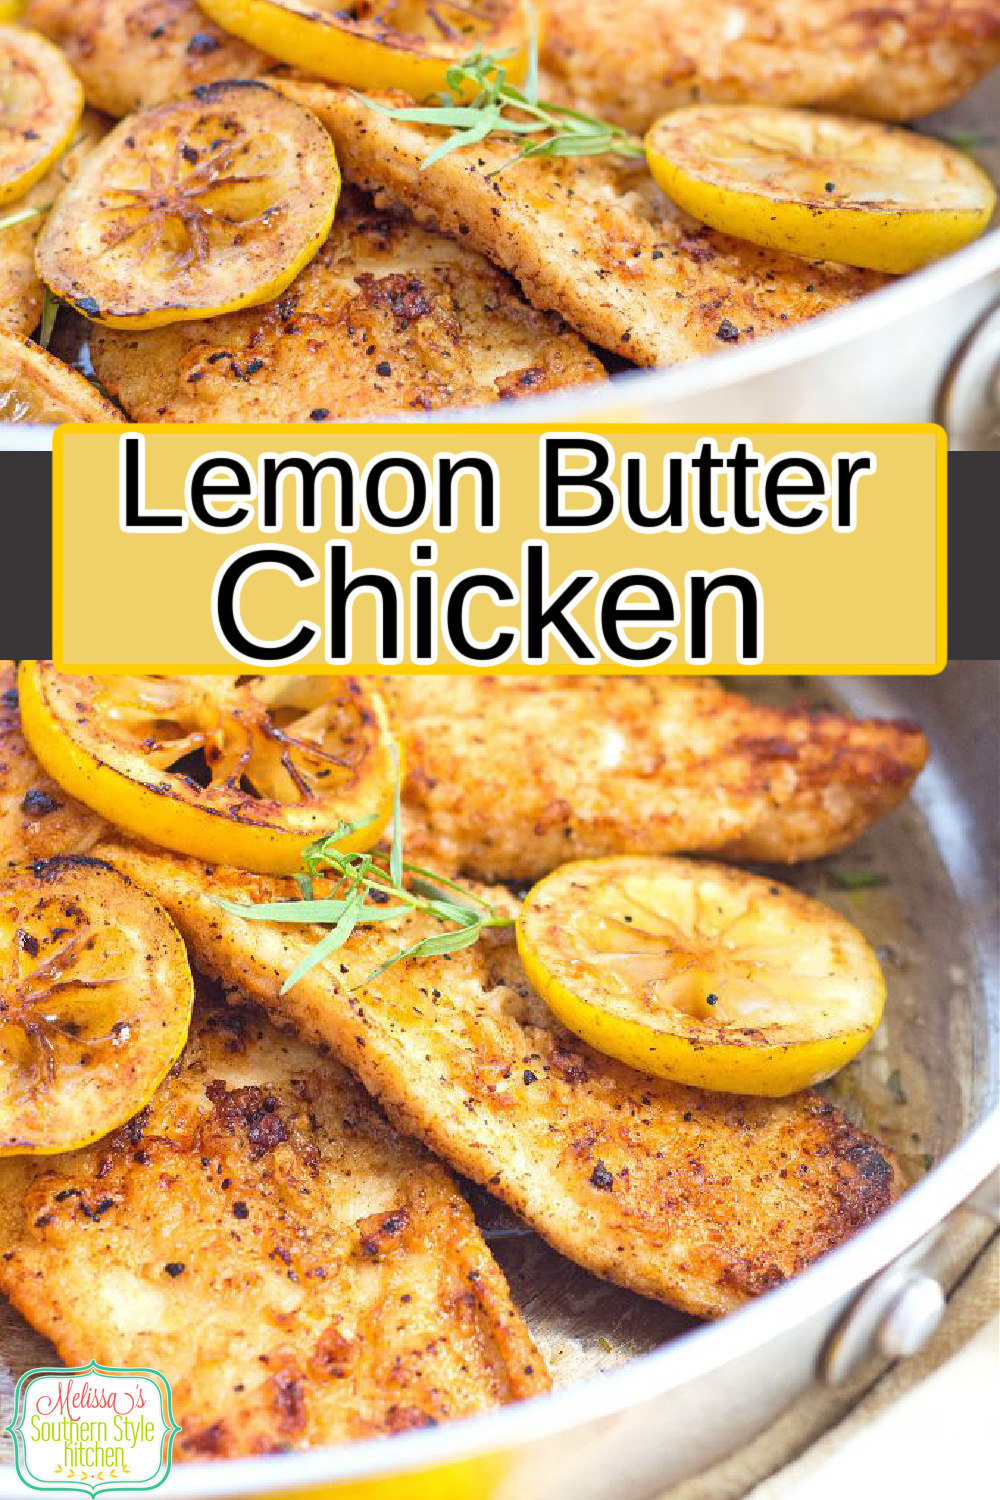 Serve this skillet Lemon Butter Chicken with Tarragon with rice or pasta and dinner is ready in 30 minutes #lemonbutterchicken #easychickenbreastrecipes #chickenrecipes #butterchicken #tarragonchicken #dinner #supper #easyrecipes #southernrecipes #lowcarb #ketorecipes via @melissasssk